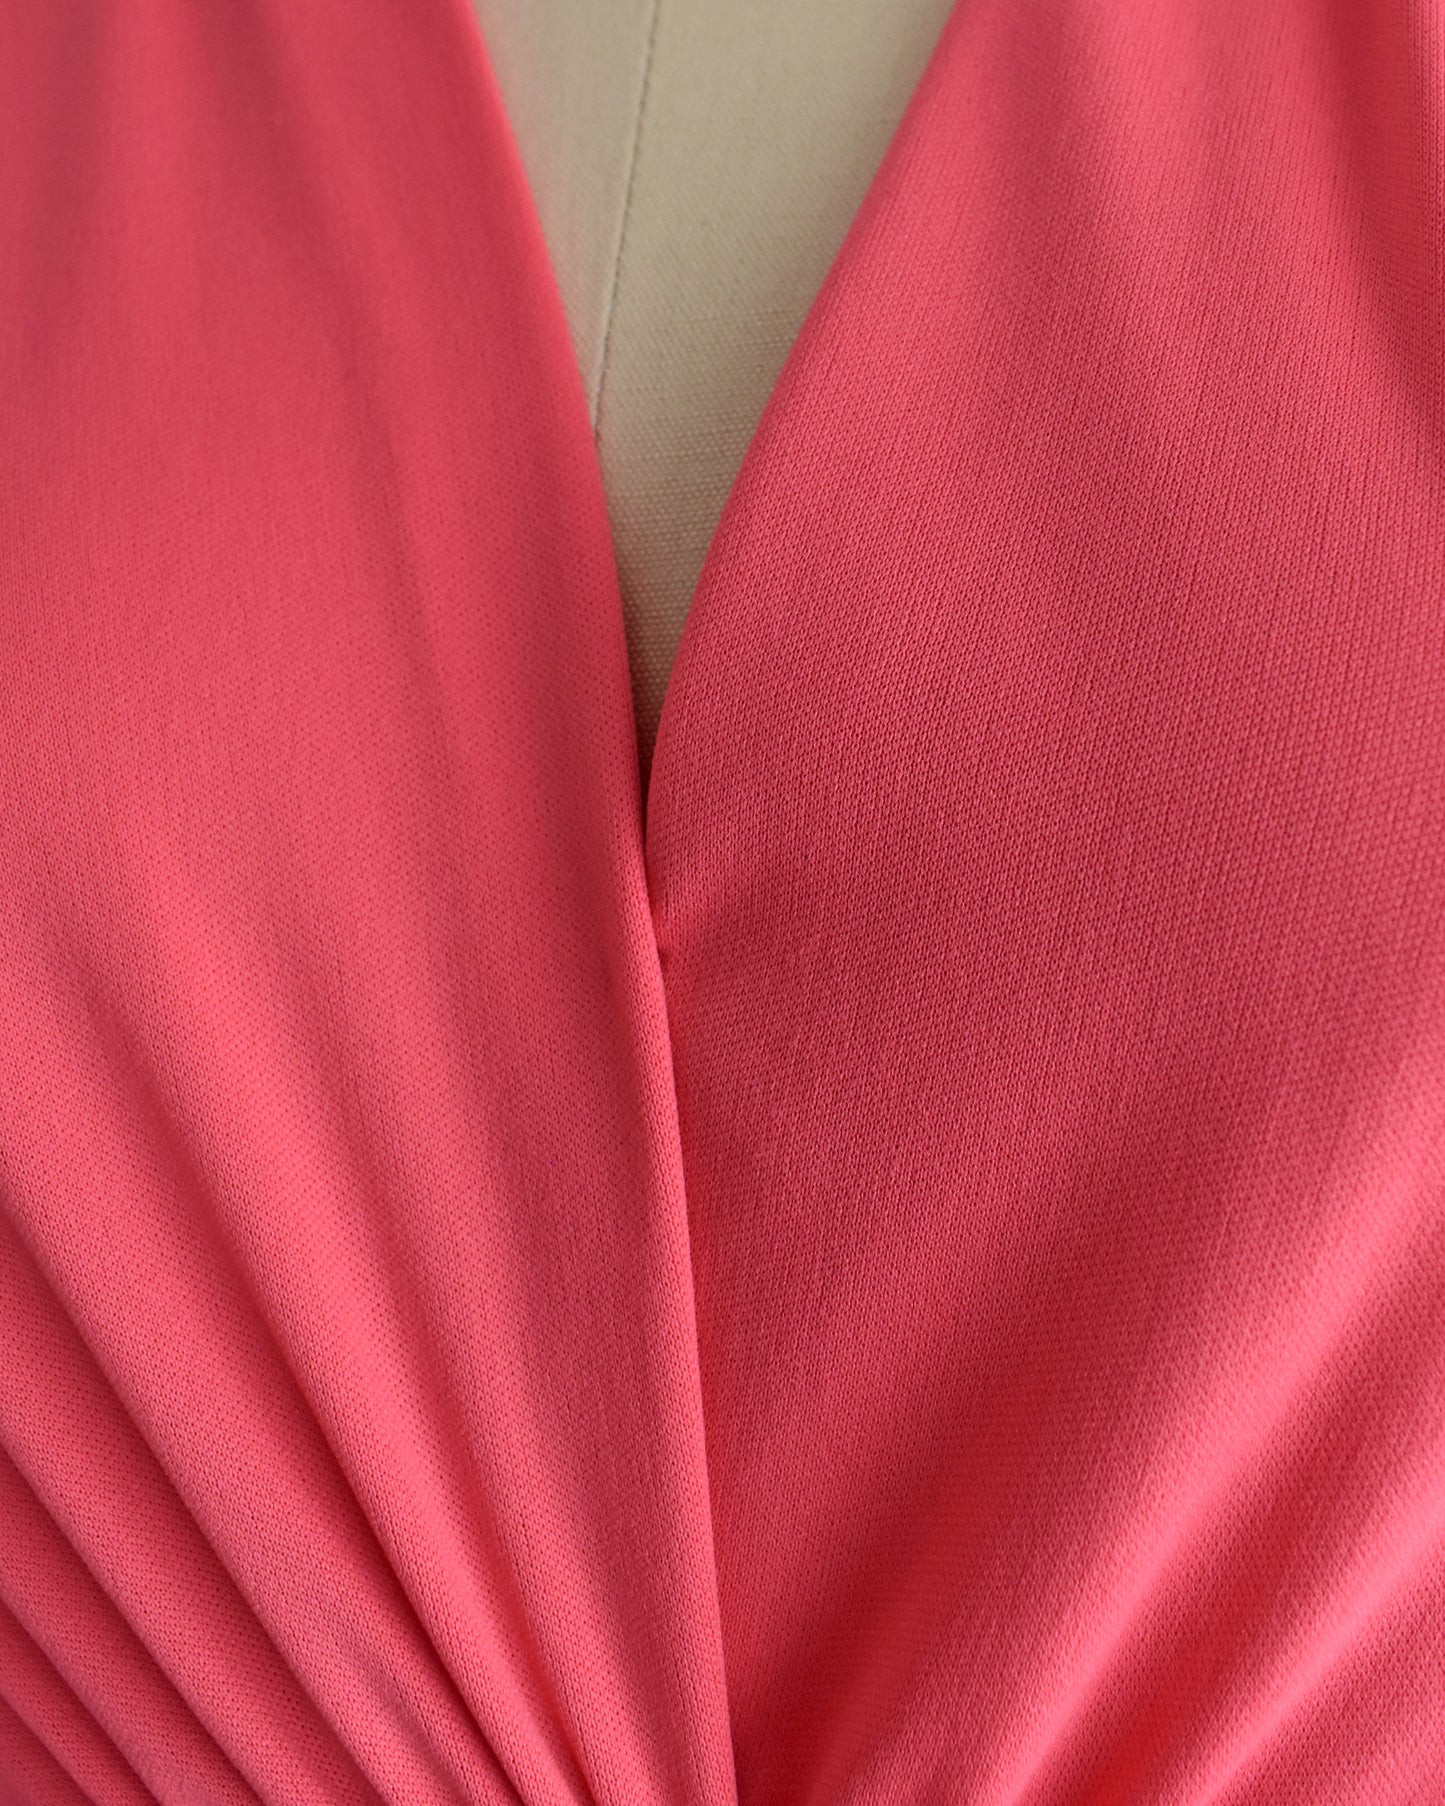 Close up of the v neckline that is stitched closed with a few stitches